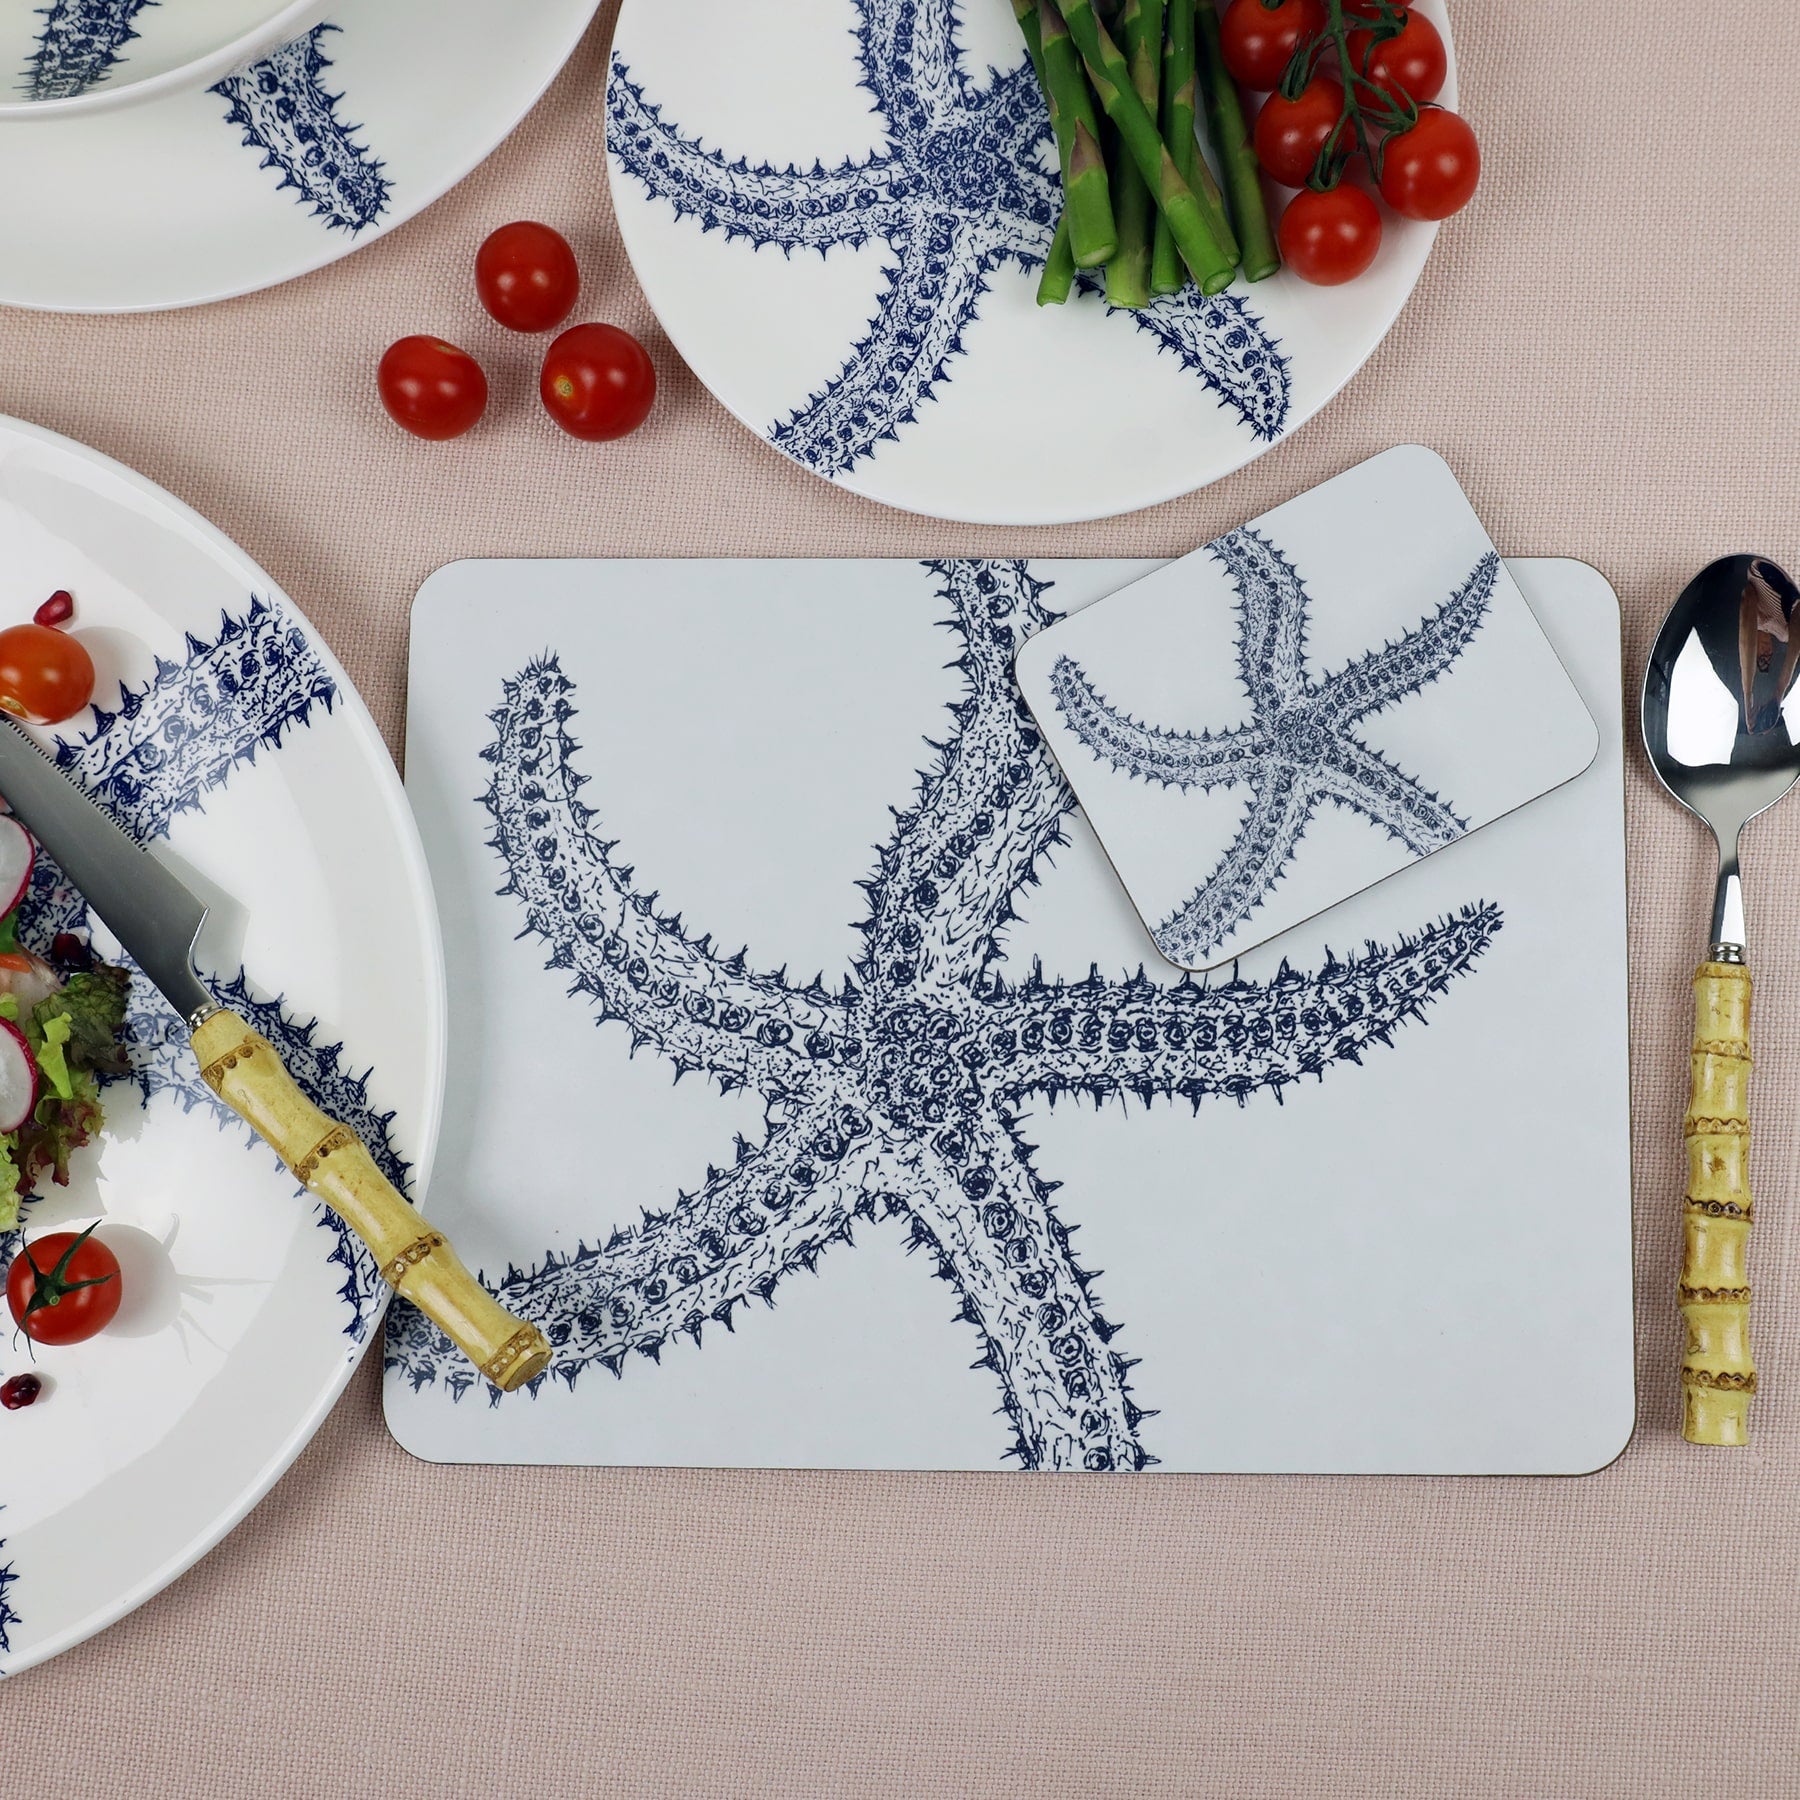 Starfish Placemat and matching Coaster placed on a table with bamboo cutlery.On the table is other tableware items